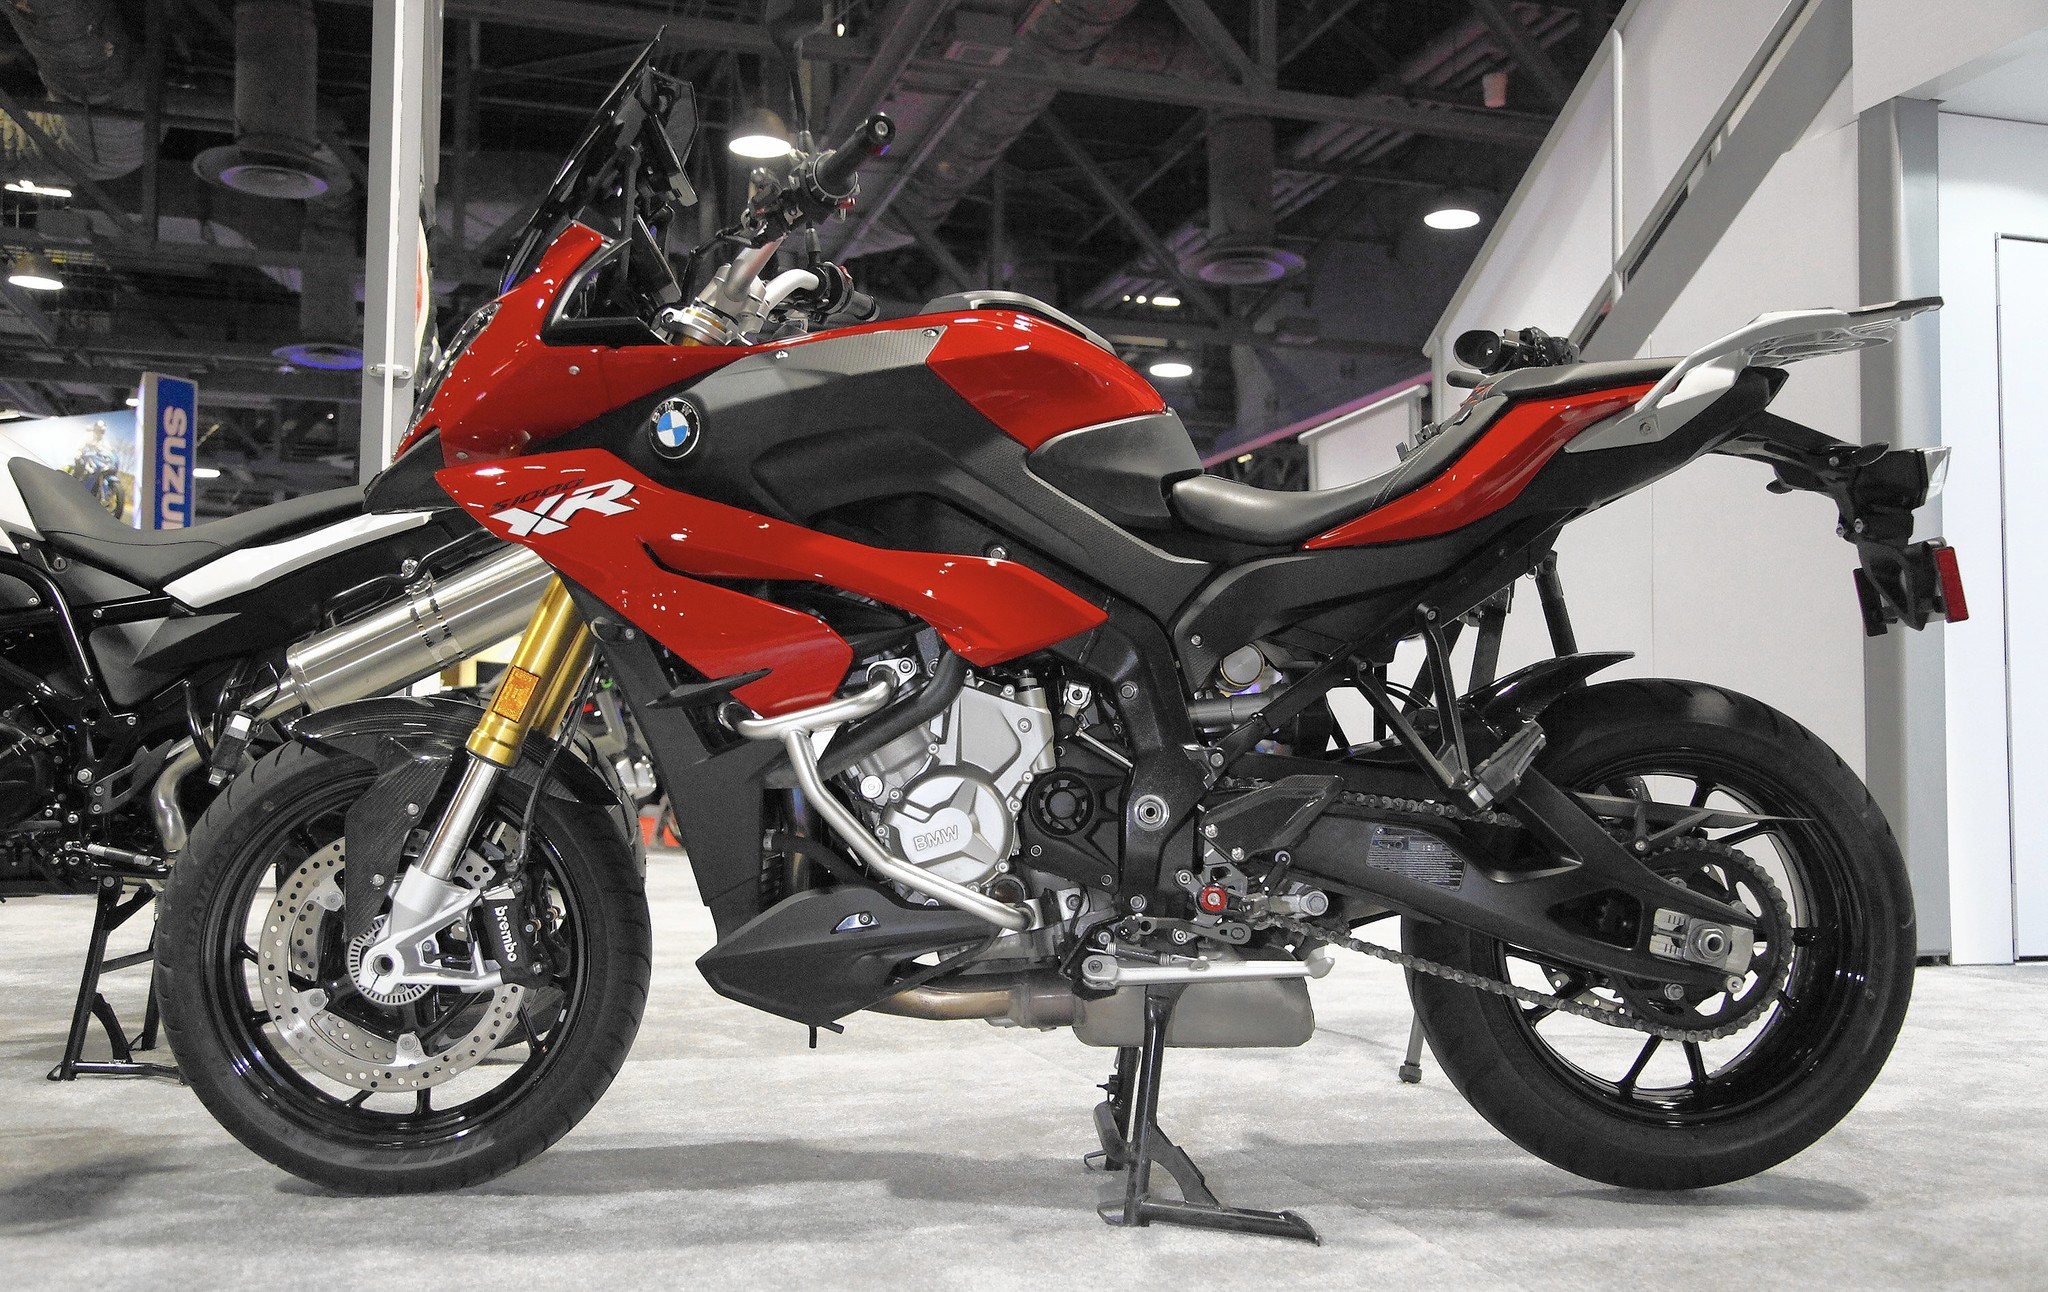 BMW's S1000XR sport bike an ideal blend of comfort and performance - LA